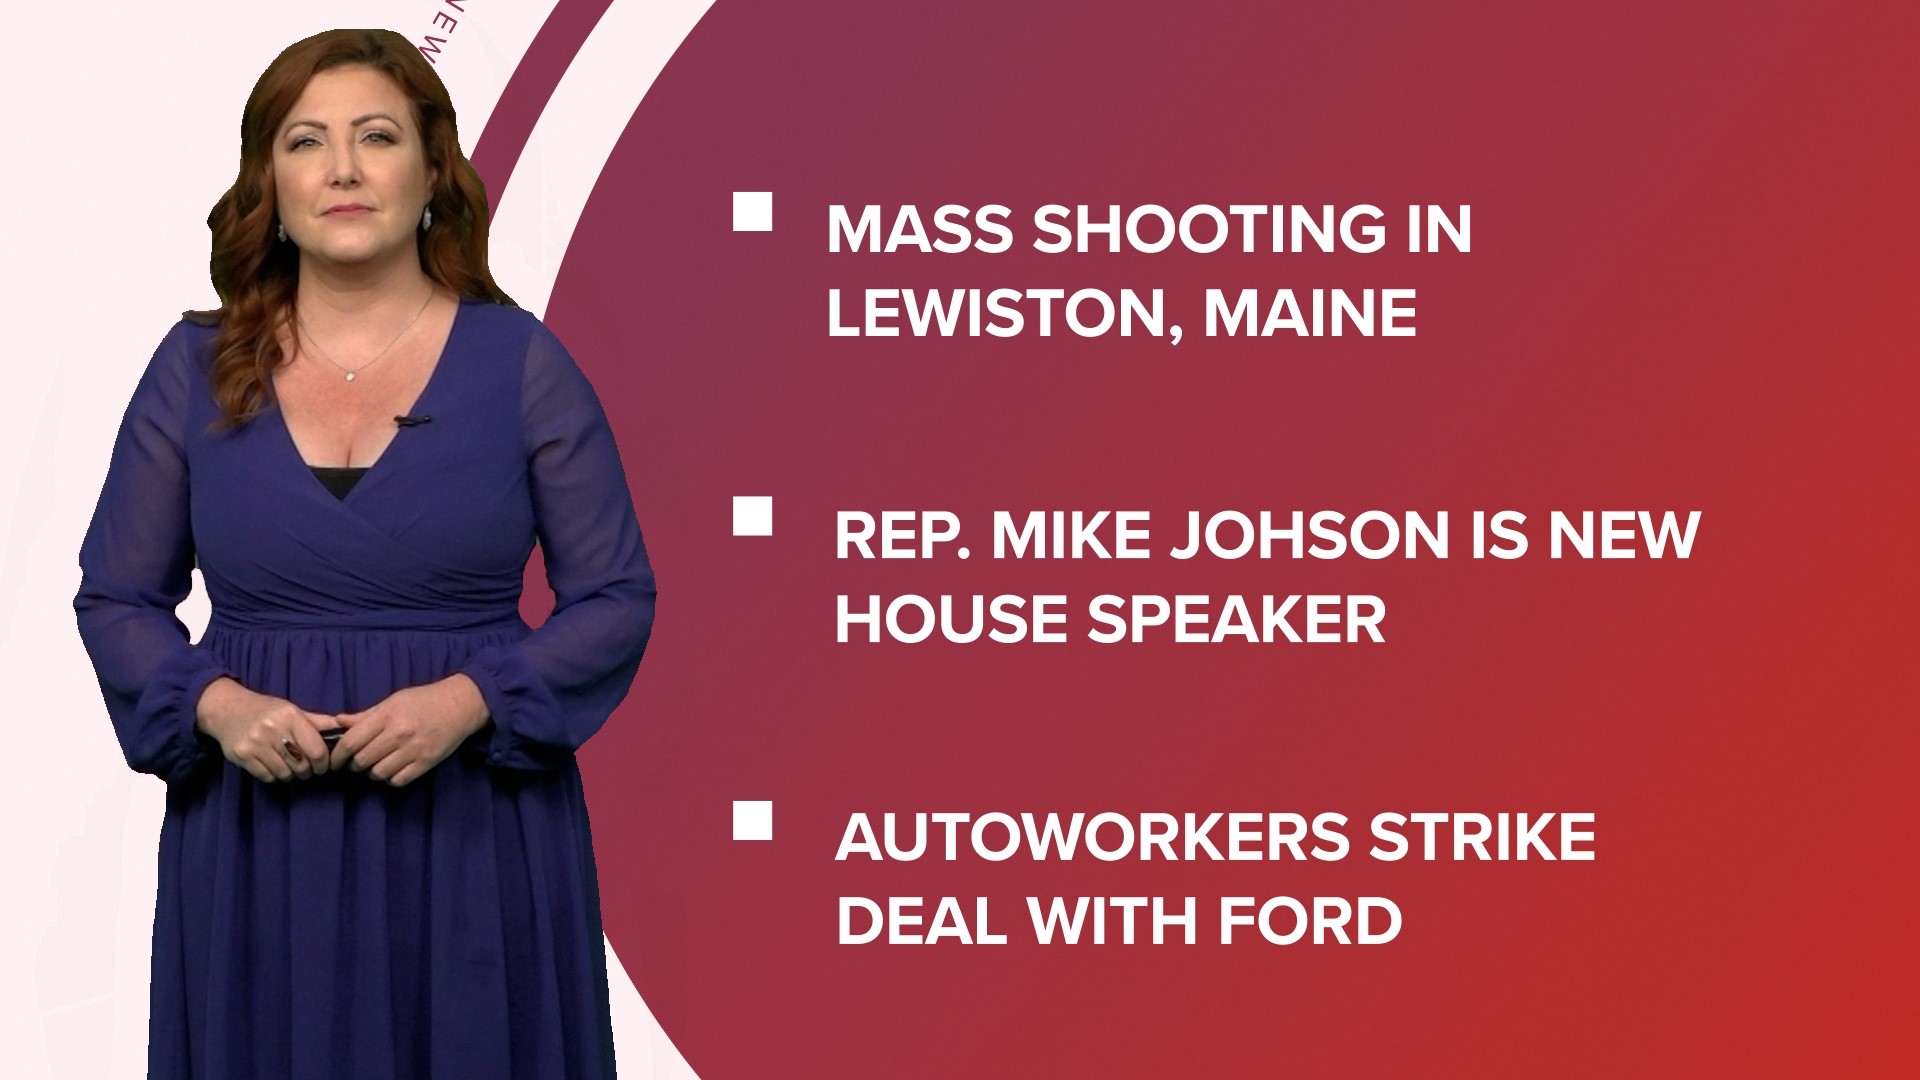 A look at what is happening in the news from a mass shooting in Lewiston, Maine to a new Speaker of the House and progress toward ending the UAW strike.